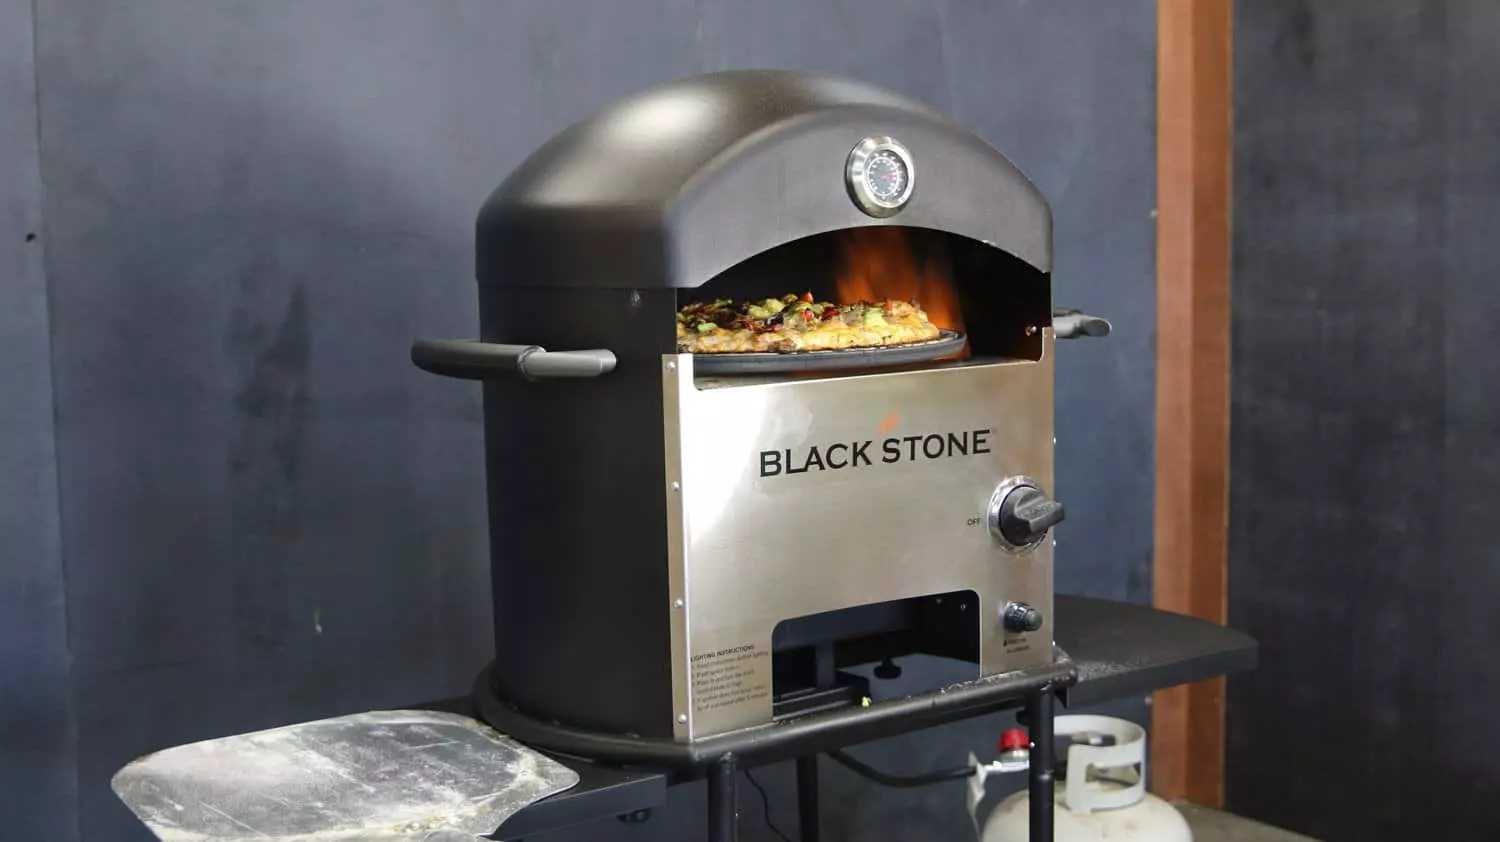 BlackStone Pizza Oven Discontinued?- Is there a better Pizza Oven then this one?